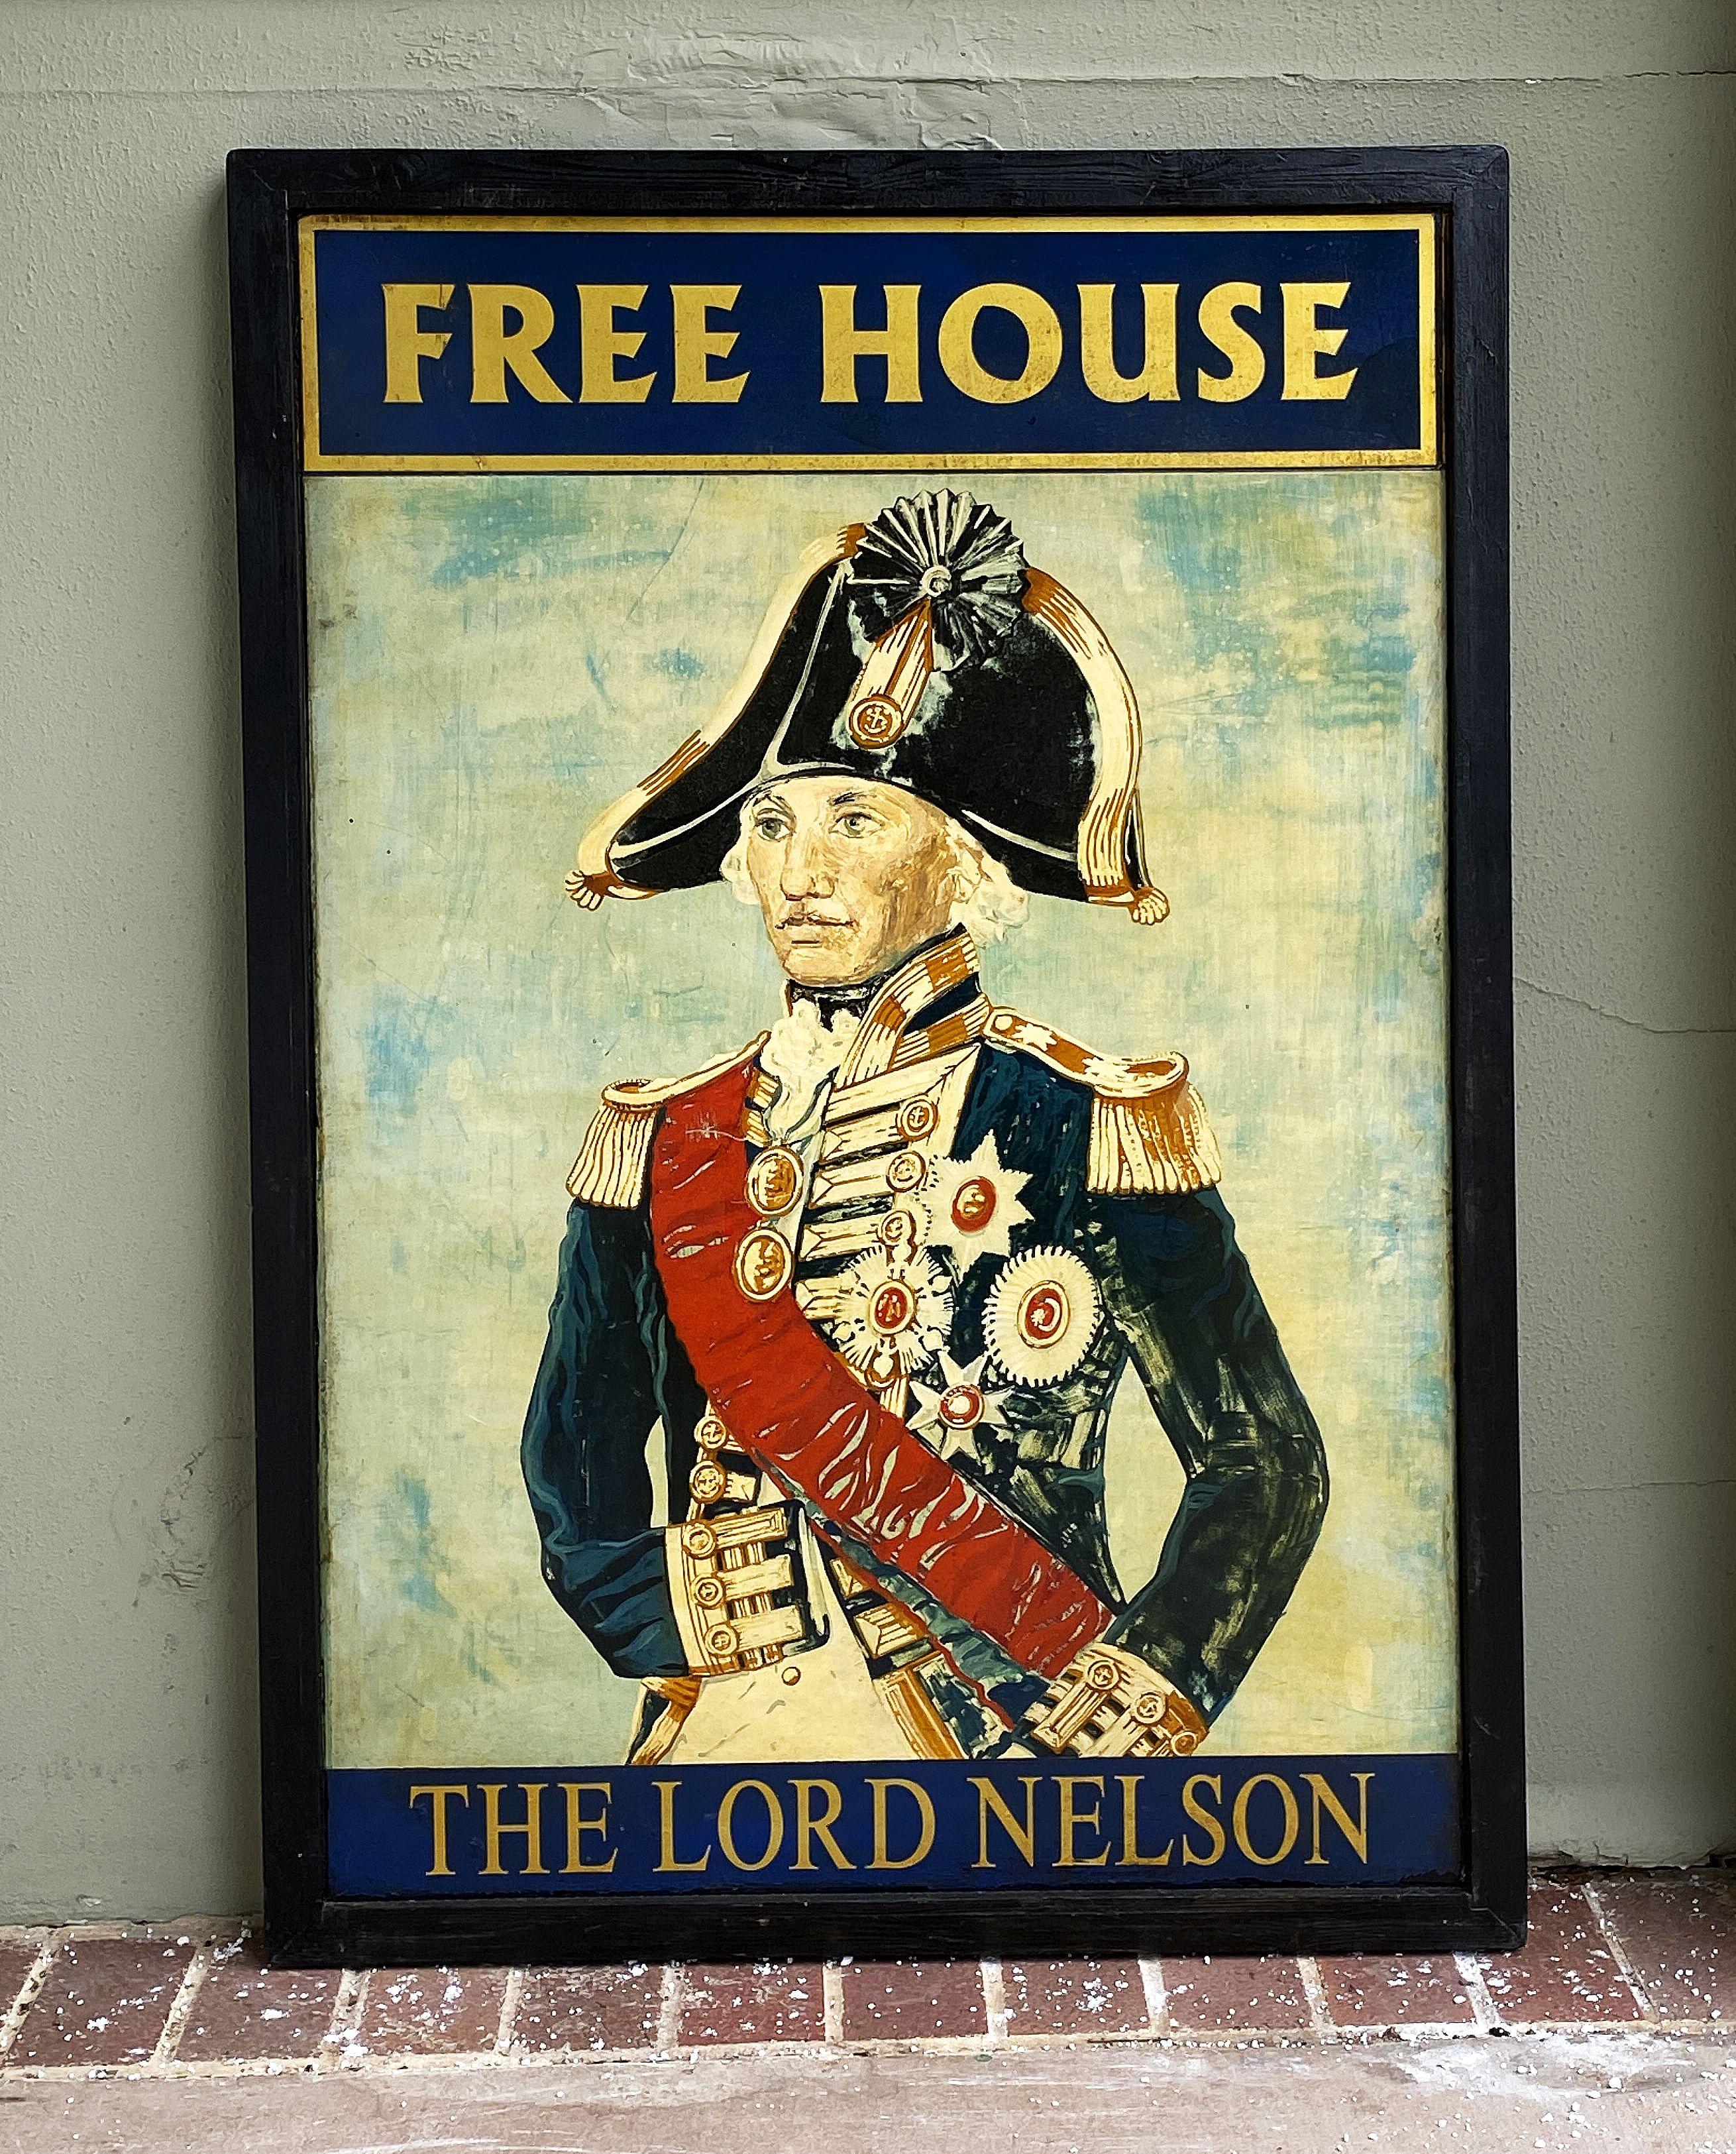 An authentic English pub sign (one-sided) featuring a portrait painting of Lord Nelson in full regalia, entitled: Free House - The Lord Nelson.

A free house in Great Britain is a public house that is not controlled by a brewery and so is free to